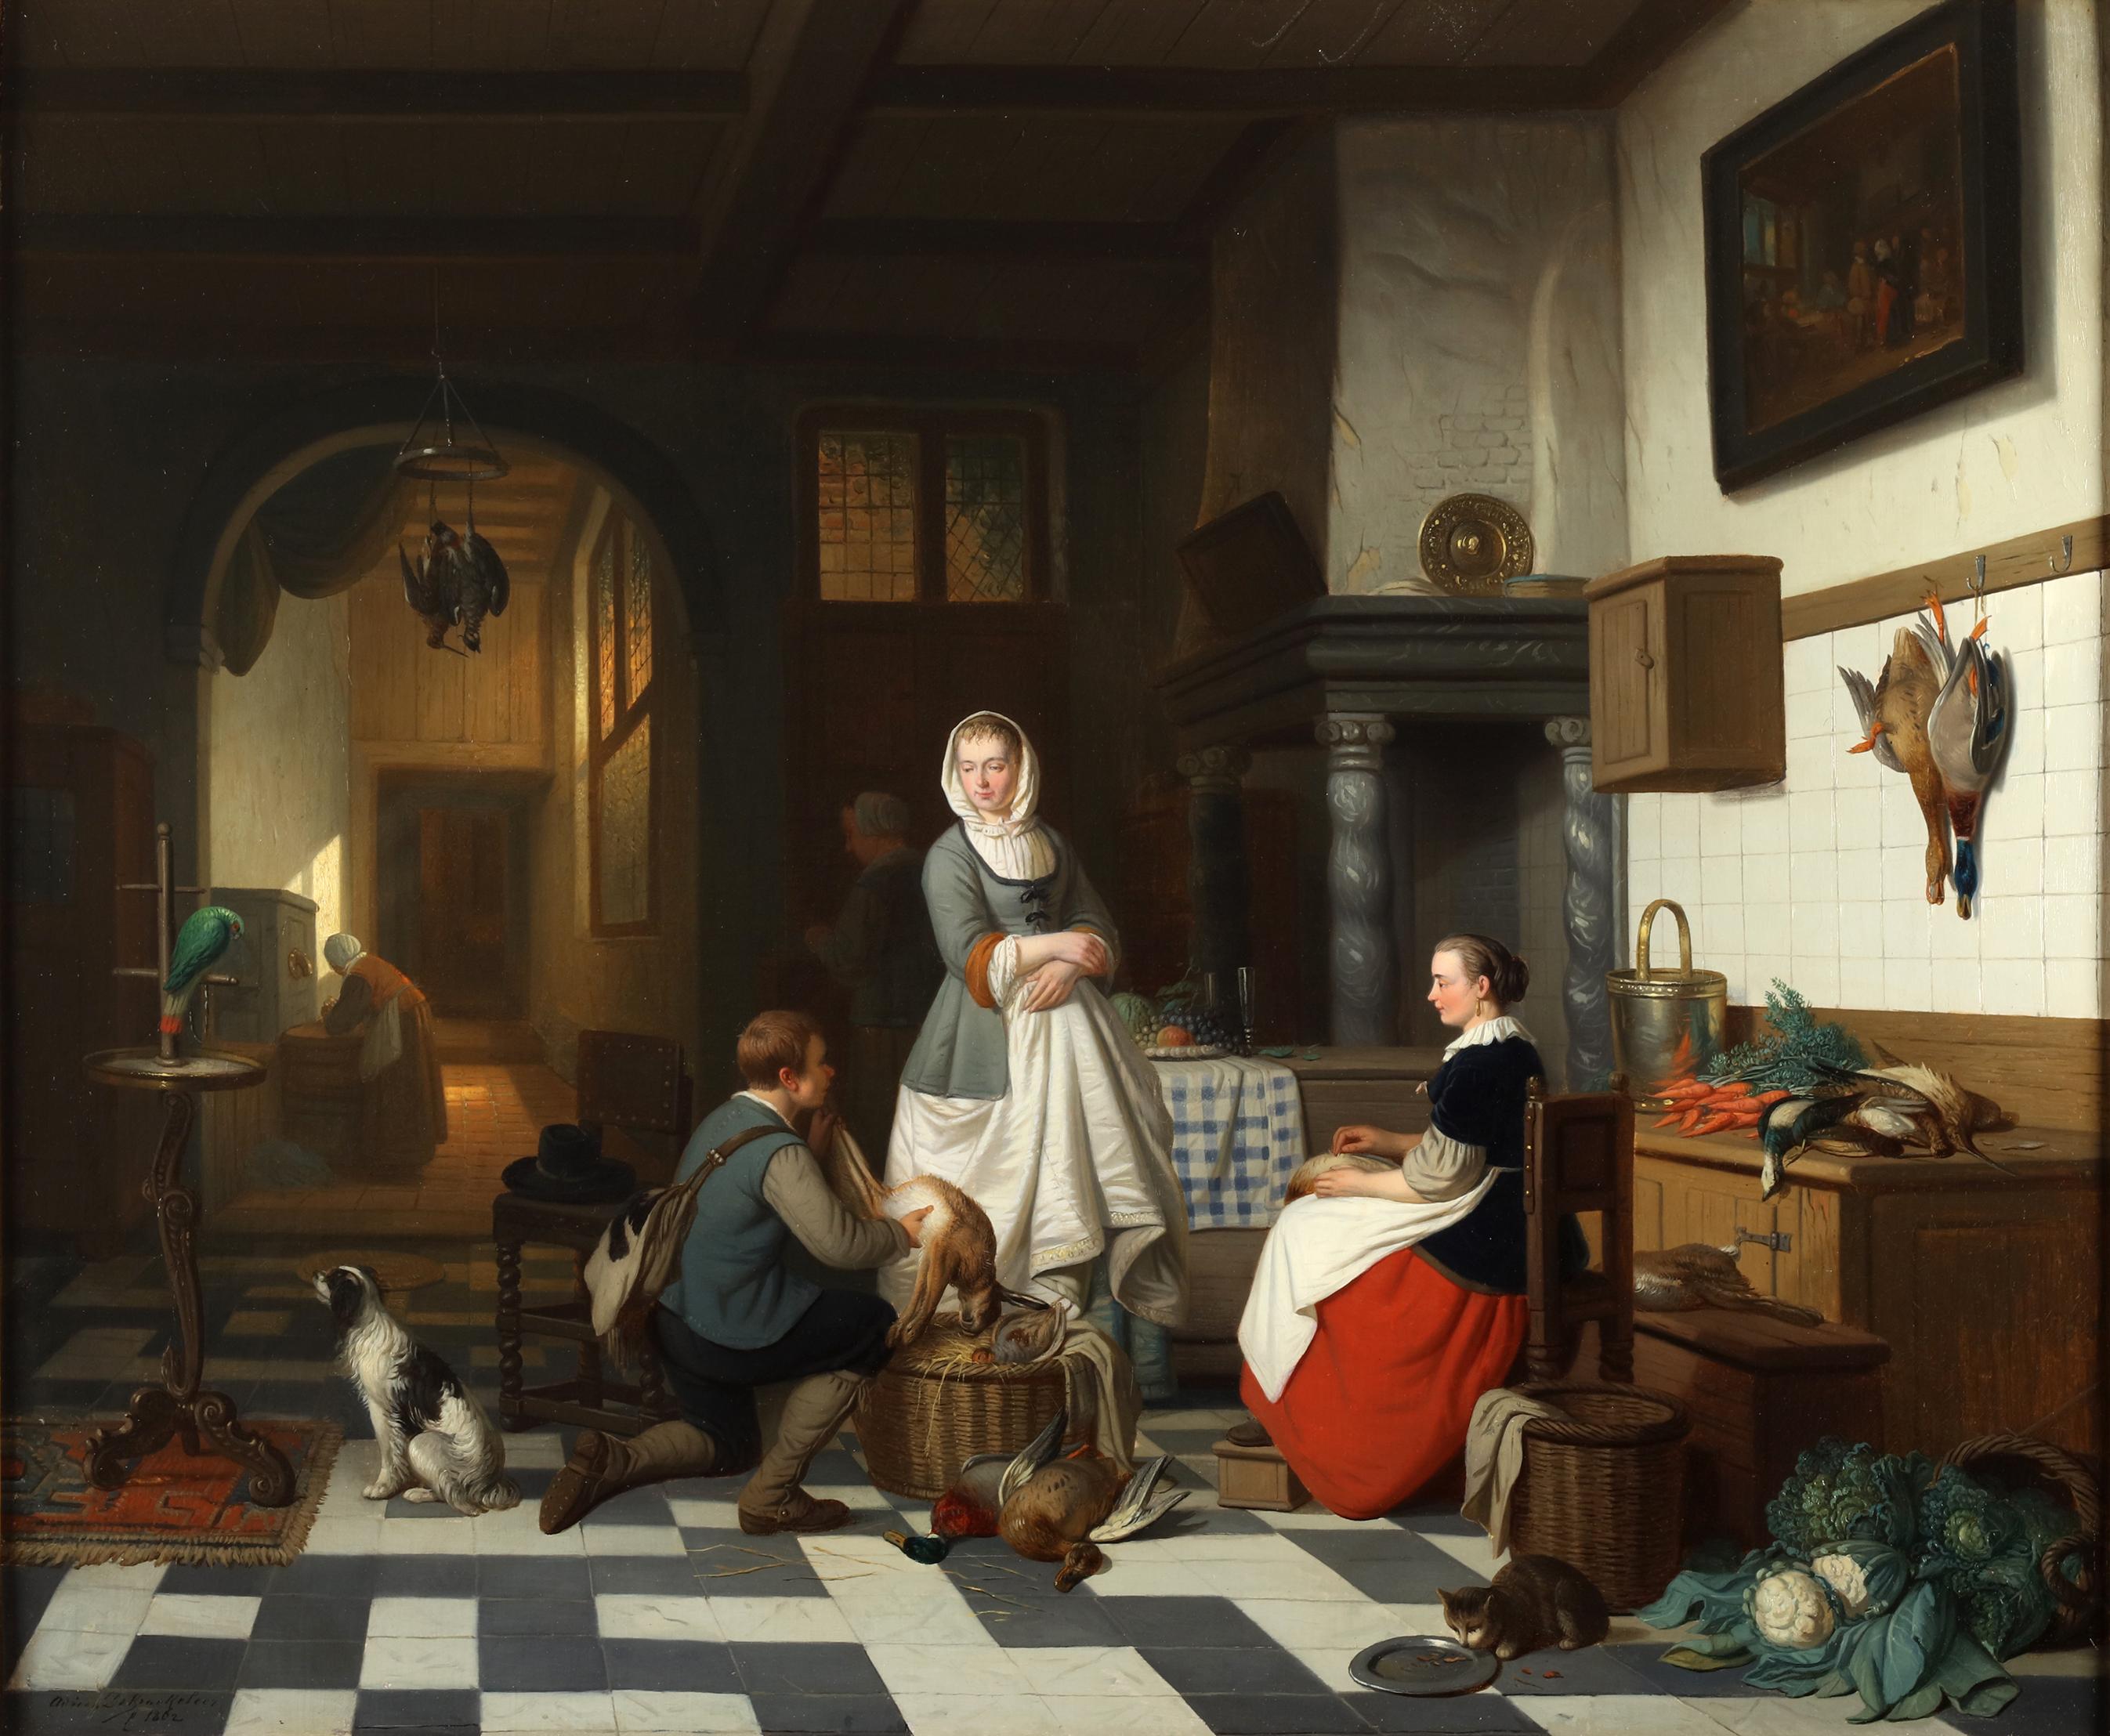 Oil on canvas

Signed lower left: "Adriaan De Braekeleer, 1862"

In Adriaan de Braekeleer's painting, the rustic charm of a kitchen interior comes alive with the warmth of a scene steeped in domesticity and bounty. At the heart of this captivating